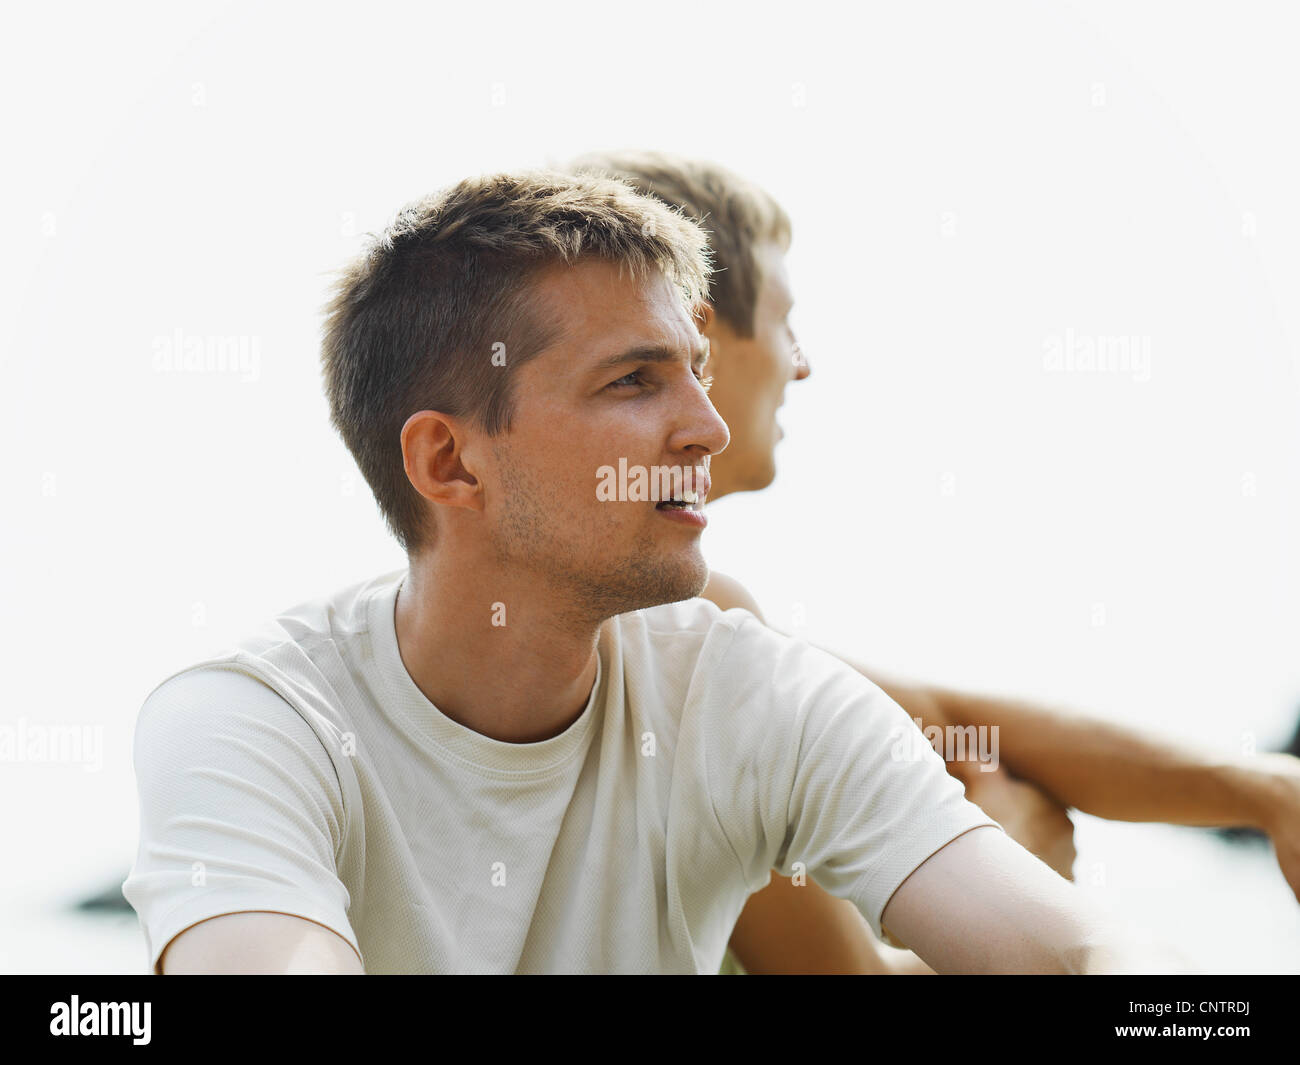 Men sitting together outdoors Stock Photo